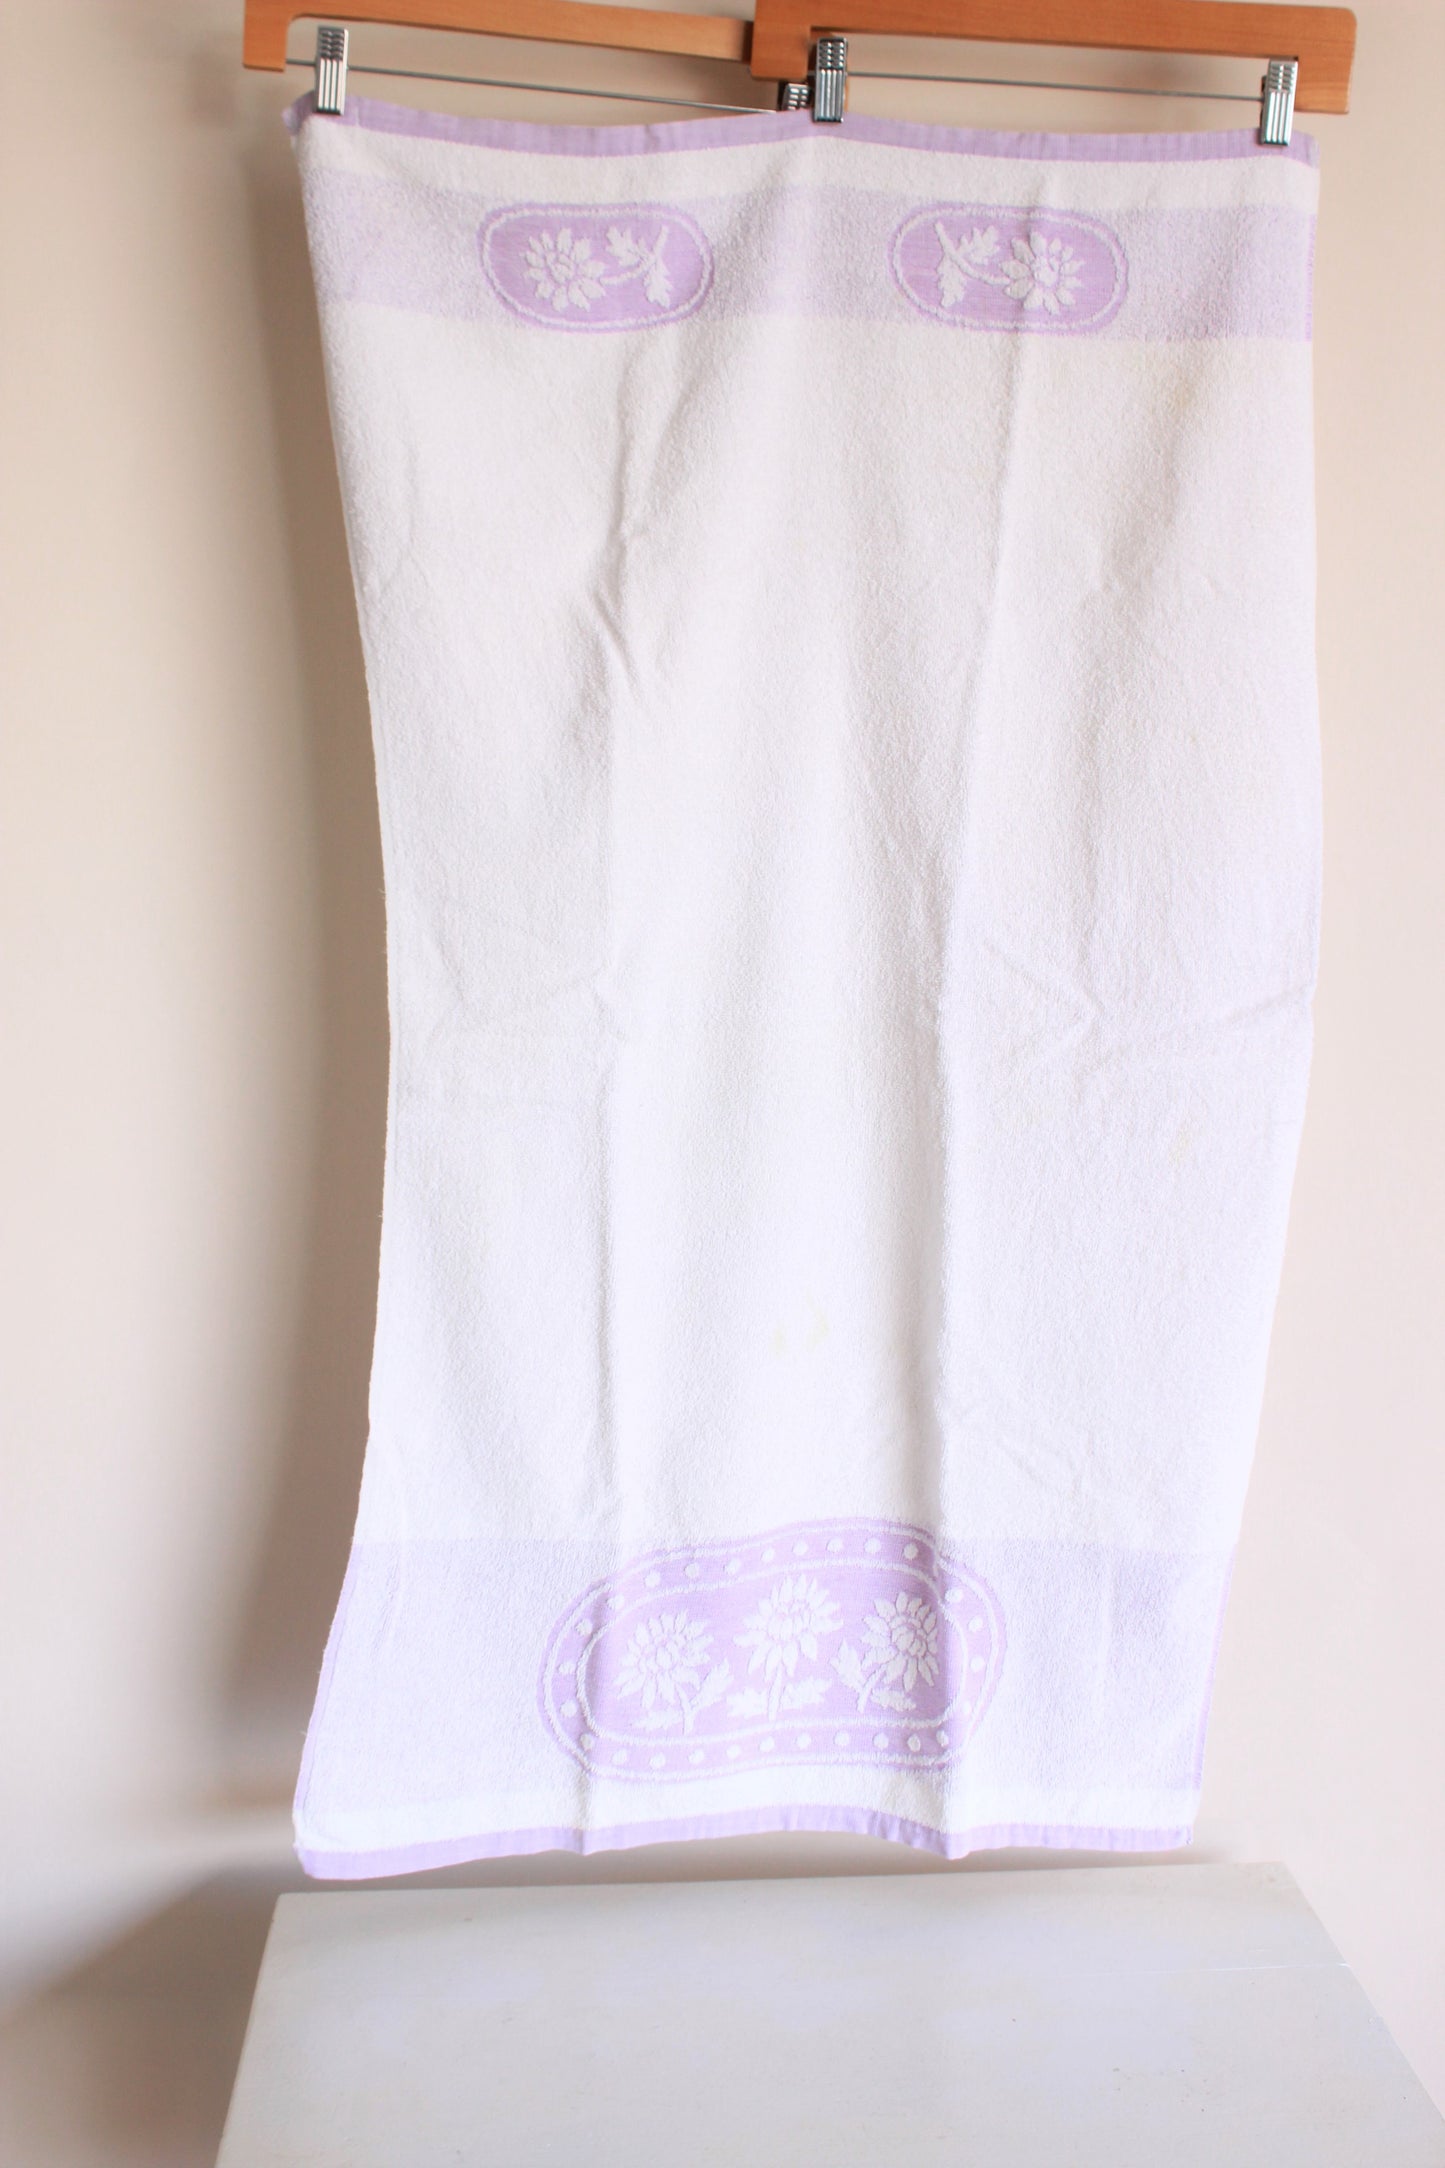 Vintage 1980s Martex Terrycloth Towel In Purple And White